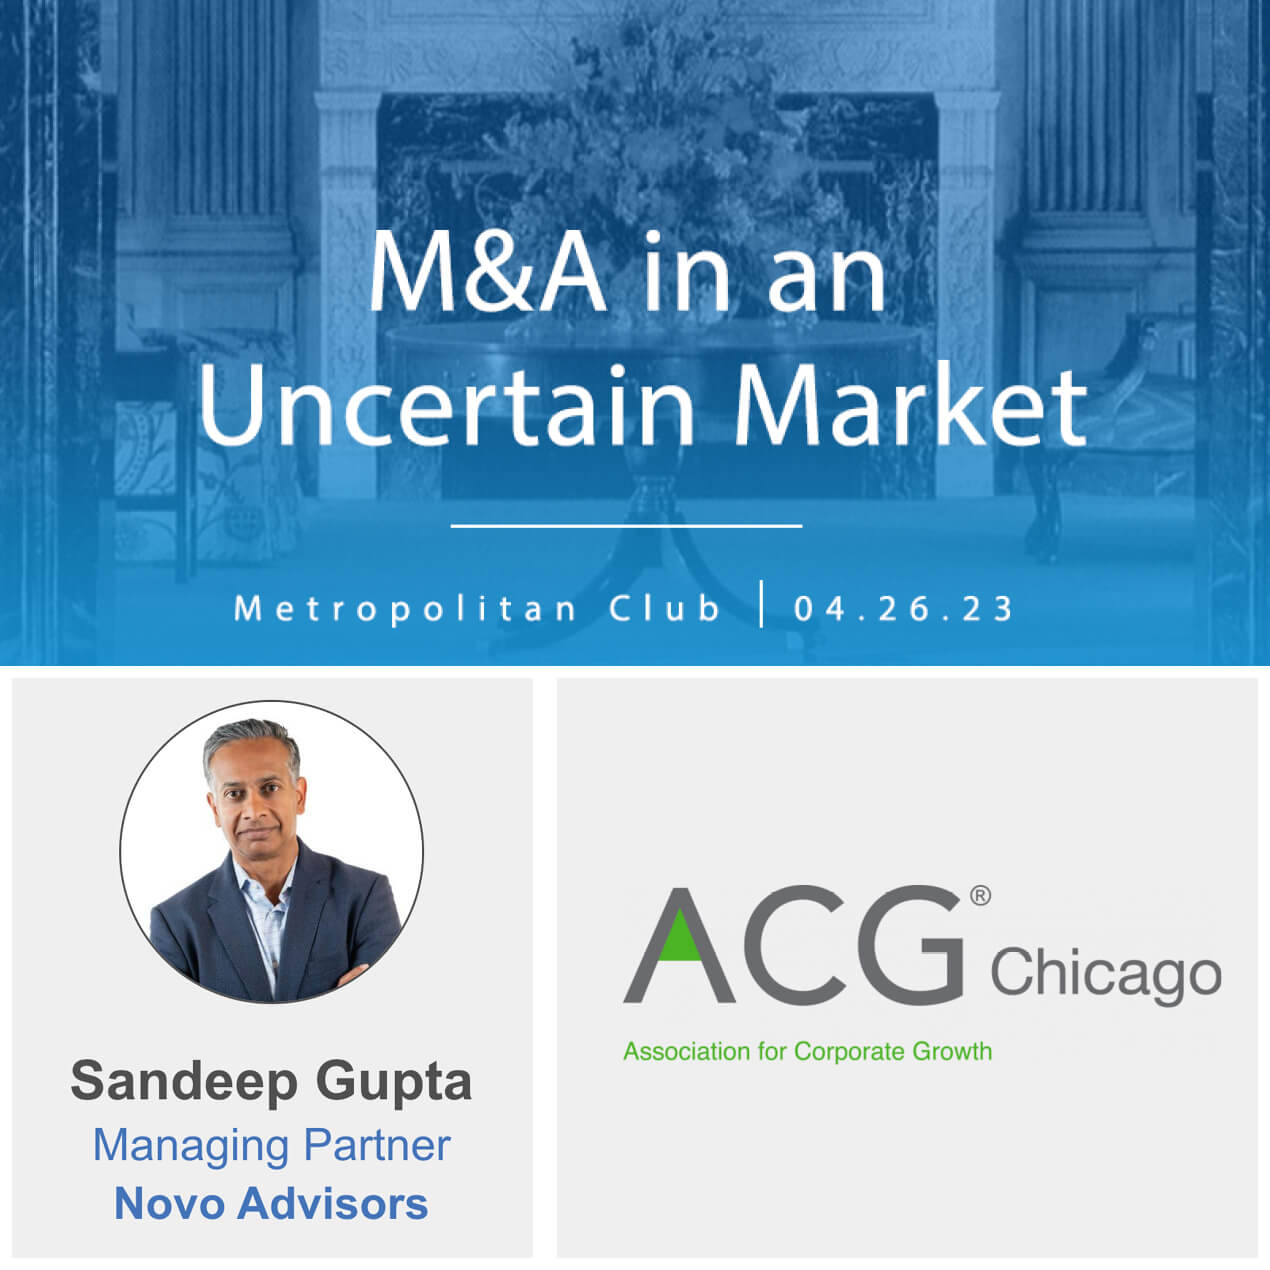 Sandeep Gupta of Novo Advisors Speaking at M&A in an Uncertain Market panel discussion by ACG Chicago